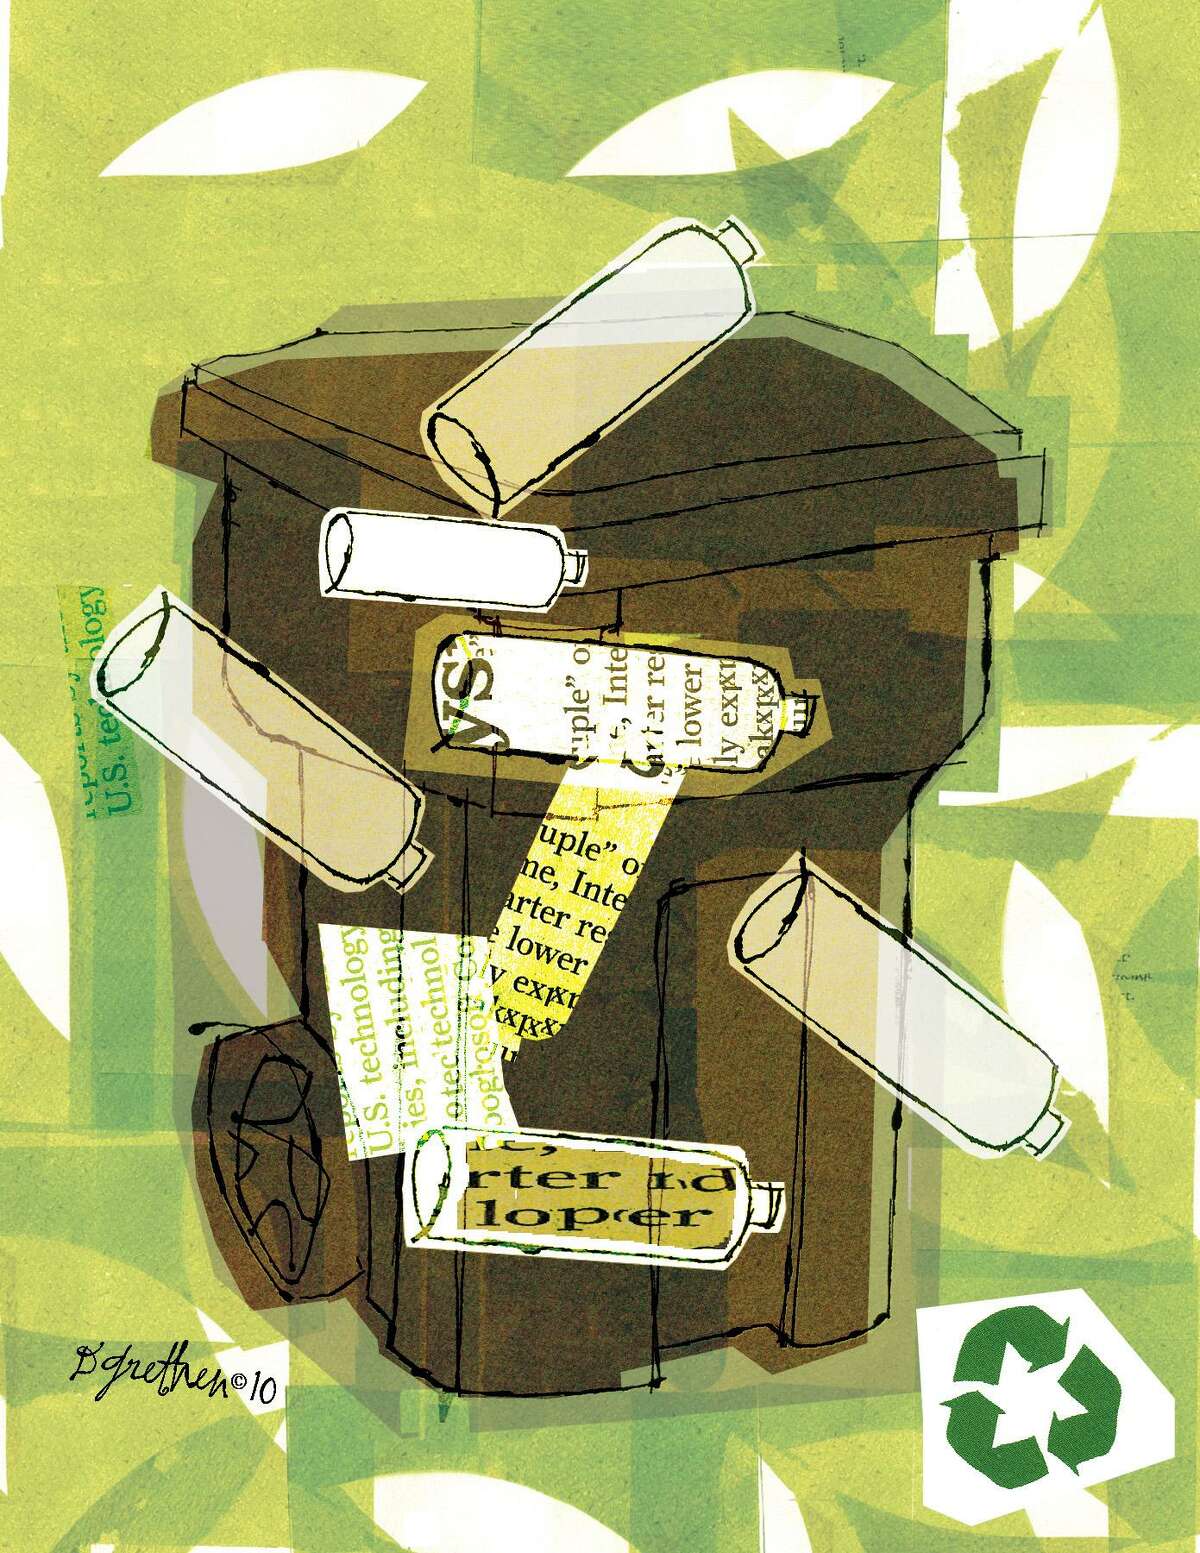 This artwork by Donna Grethen relates to recycling.